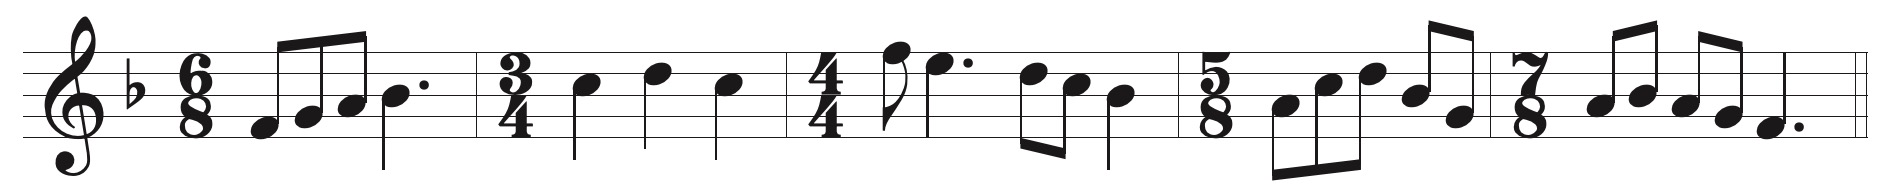 changing time signatures